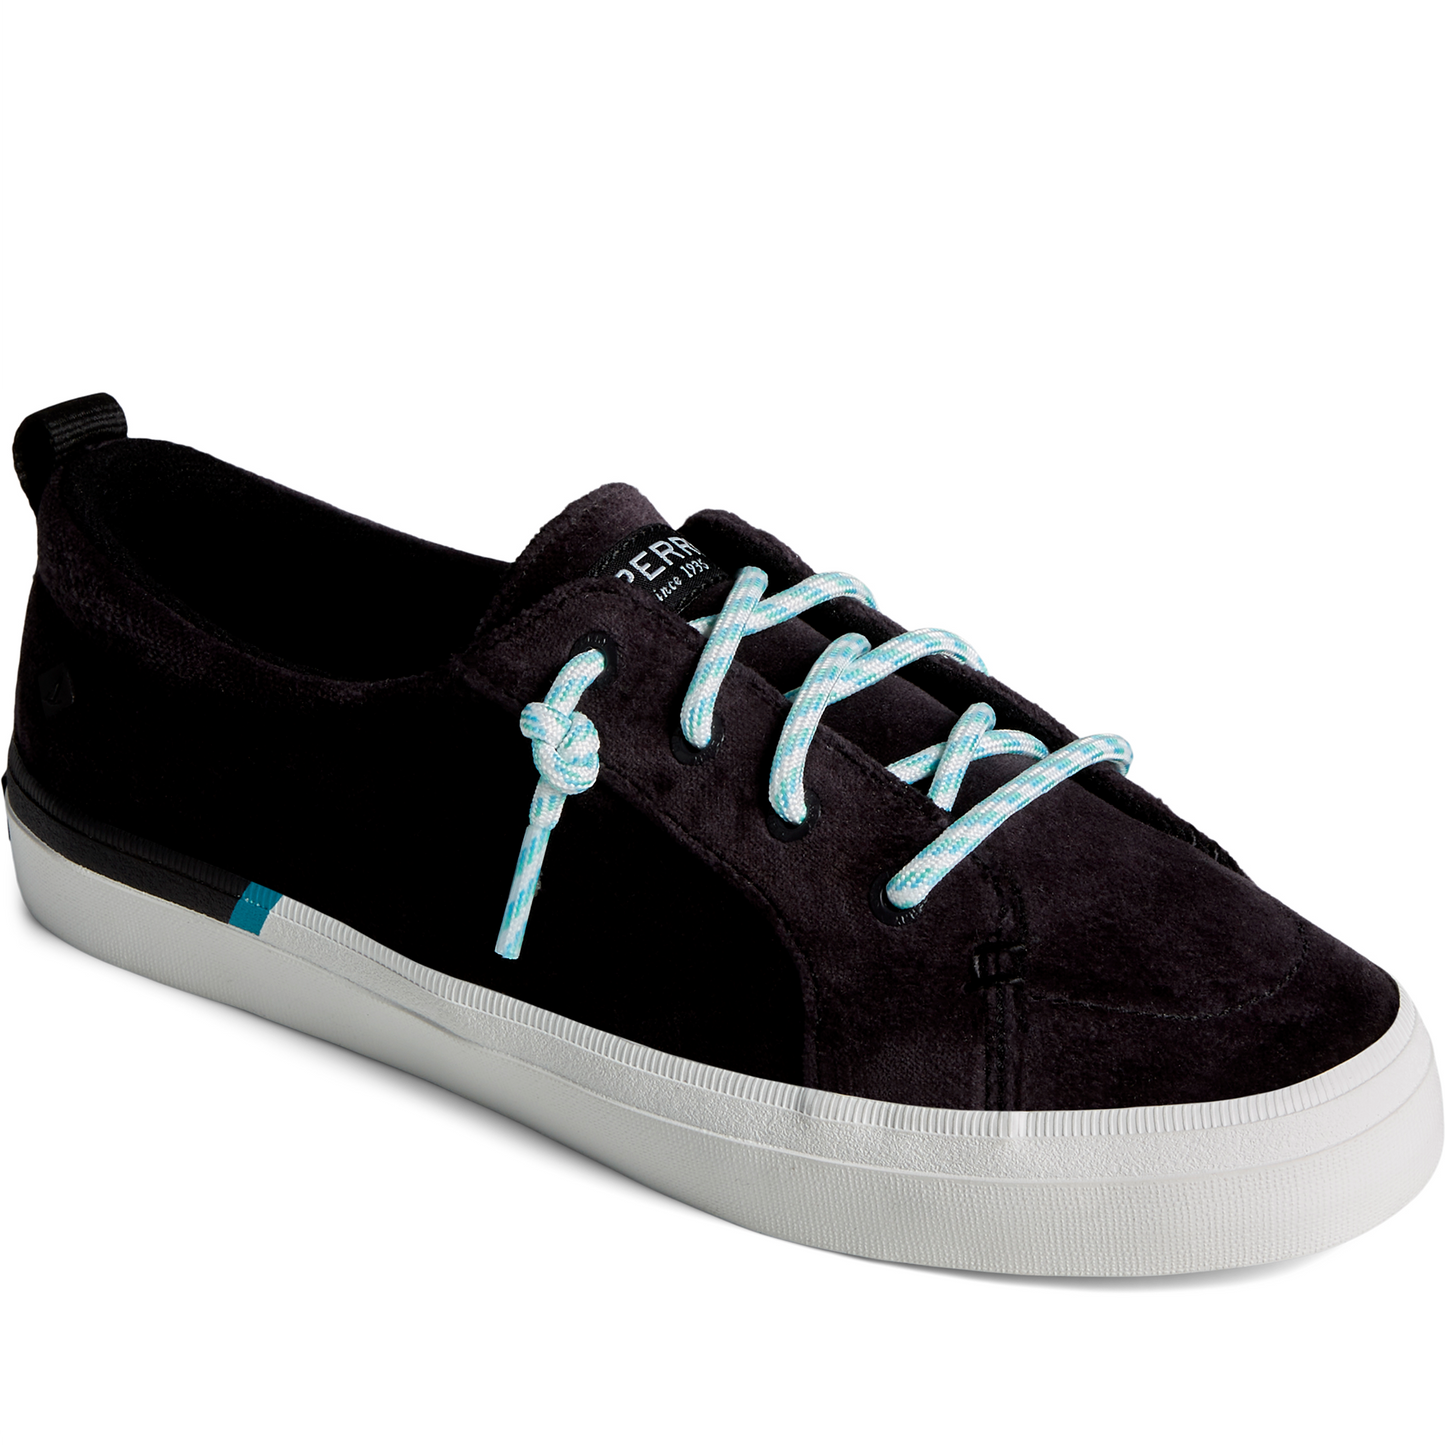 Sperry Women's Crest Vibe Brushed Cotton Sneaker - Black (STS87859)